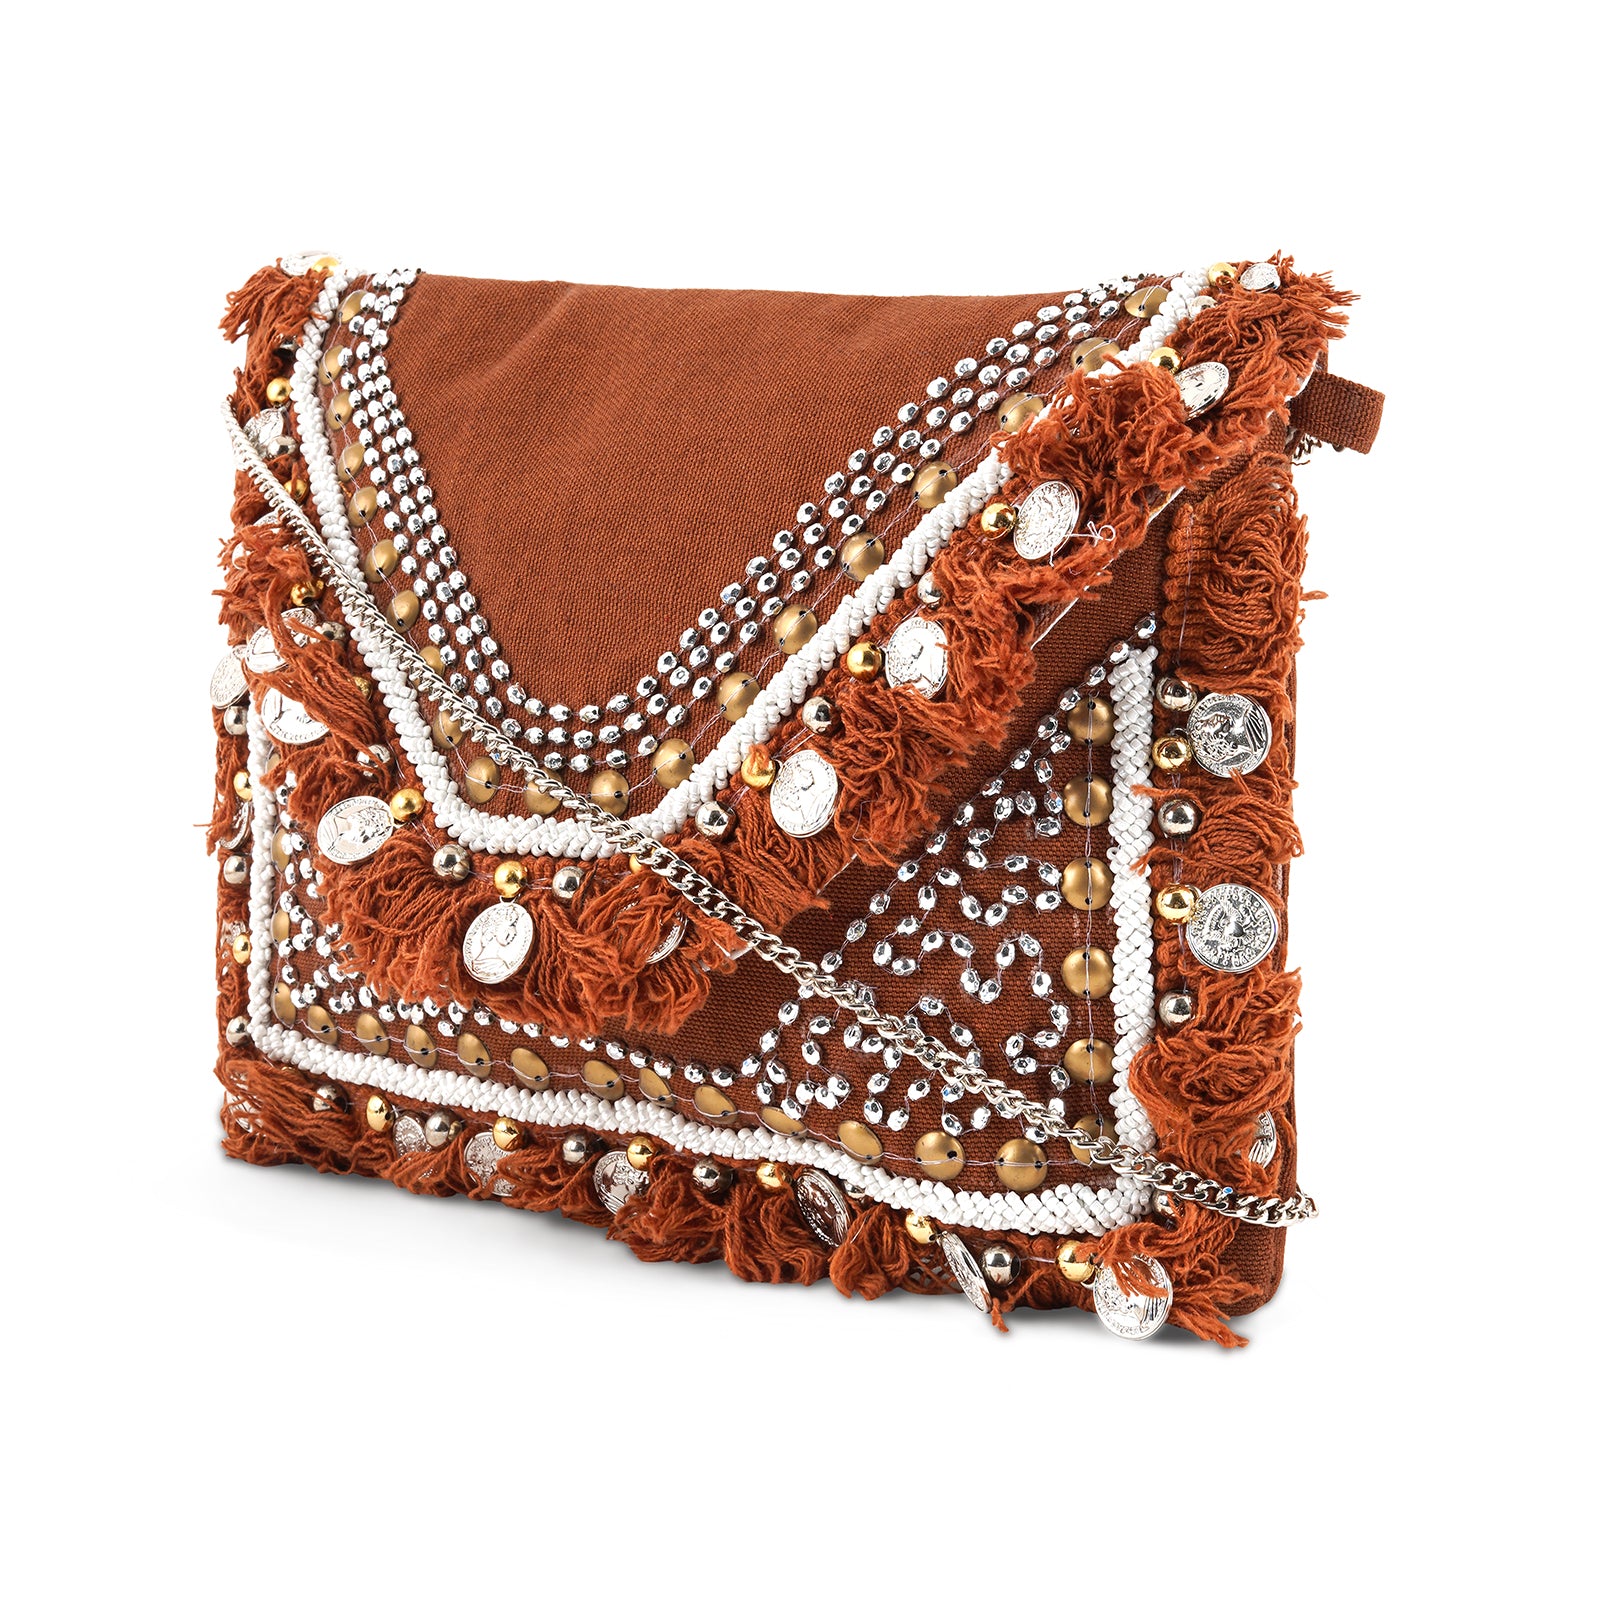 Banjara Boho Bags. We have adorned these with shells, coins